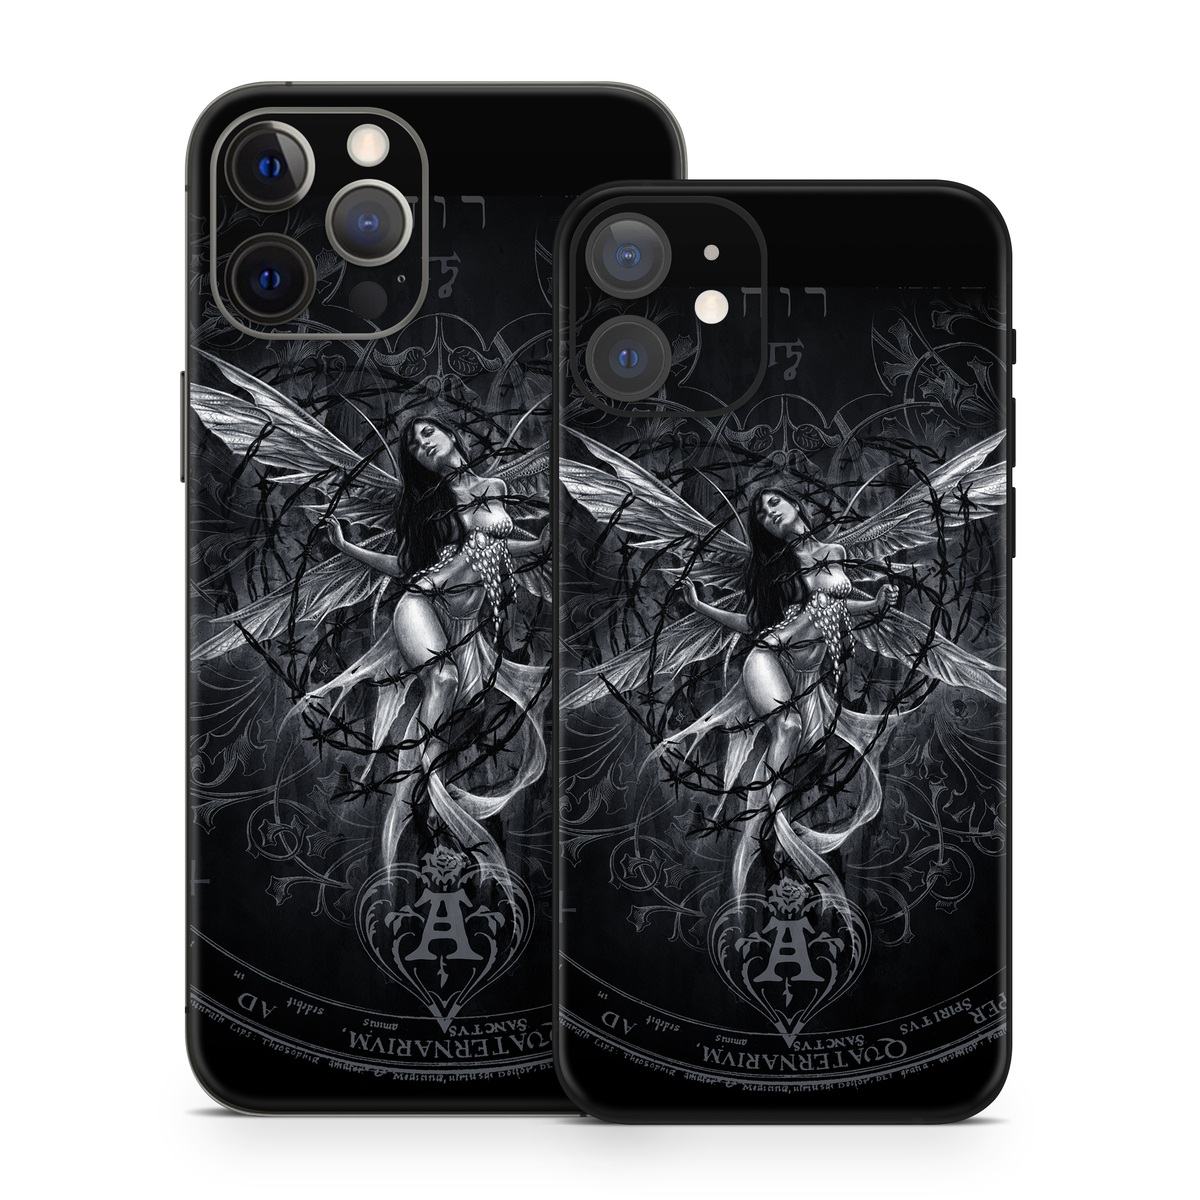 iPhone 12 Skin design of Illustration, Graphic design, Darkness, Fictional character, Black-and-white, Pattern, Graphics, Mythical creature, Circle, Wing, with black, white colors